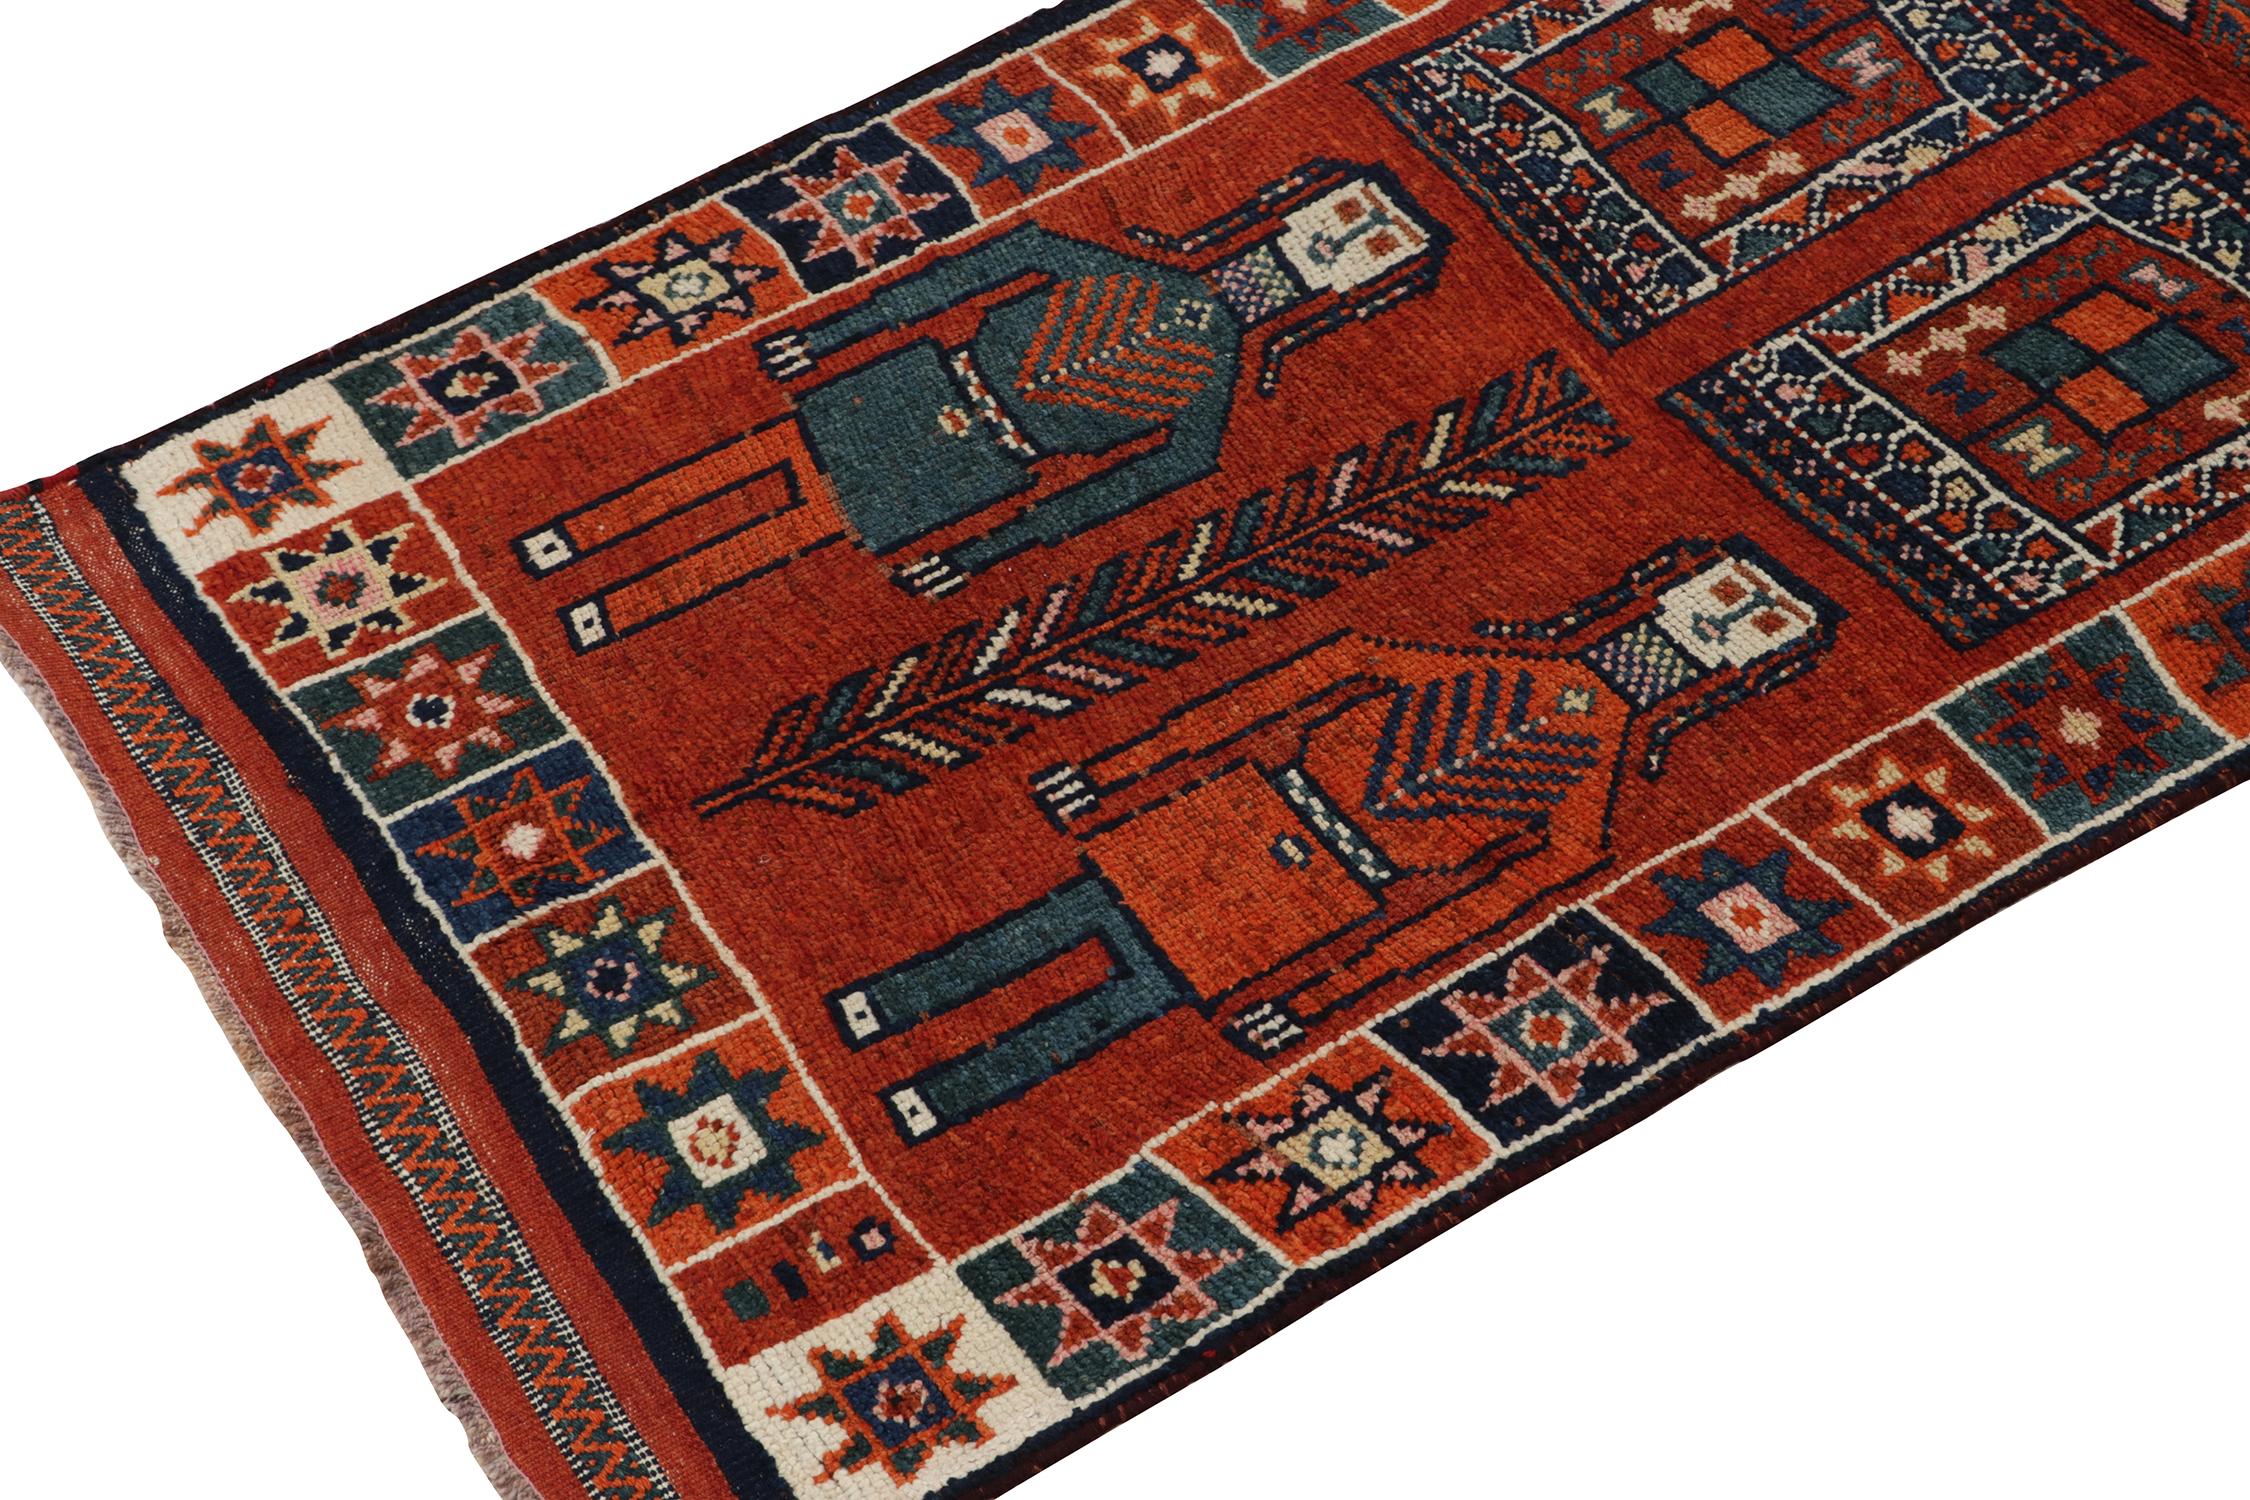 1950s Vintage Tribal Rug in Orange, Red and Blue Pictorial Patterns In Good Condition For Sale In Long Island City, NY